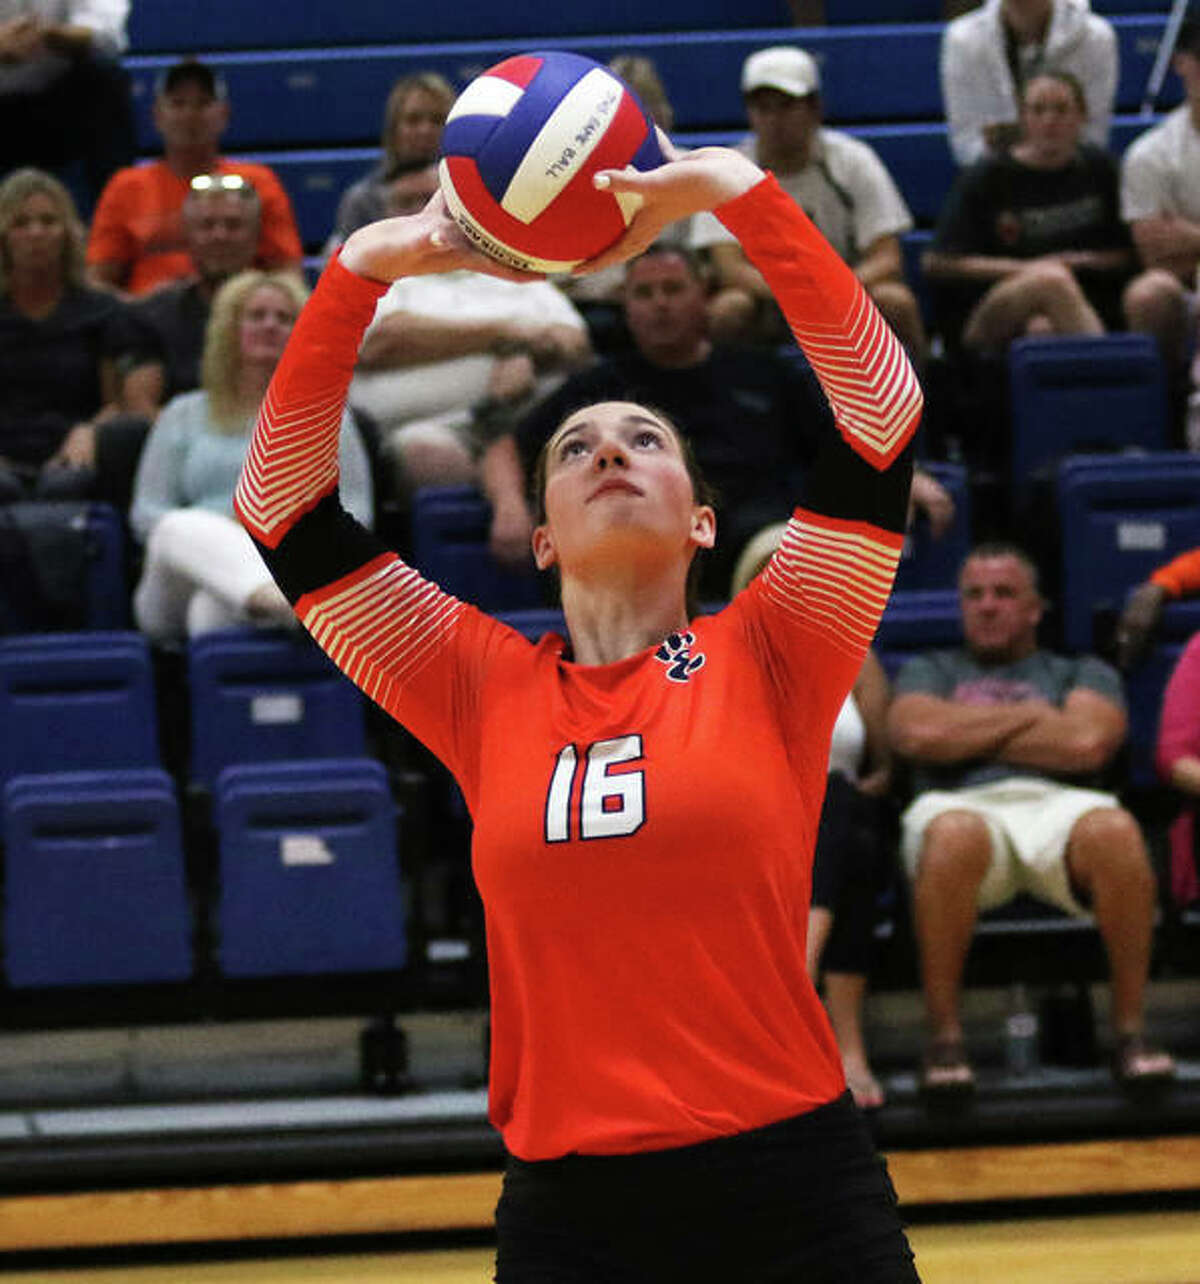 Edwardsville sophomore setter Lexie Griffin had 16 assists in her first varsity start Tuesday in the Tigers’ three-set victory at O’Fallon.